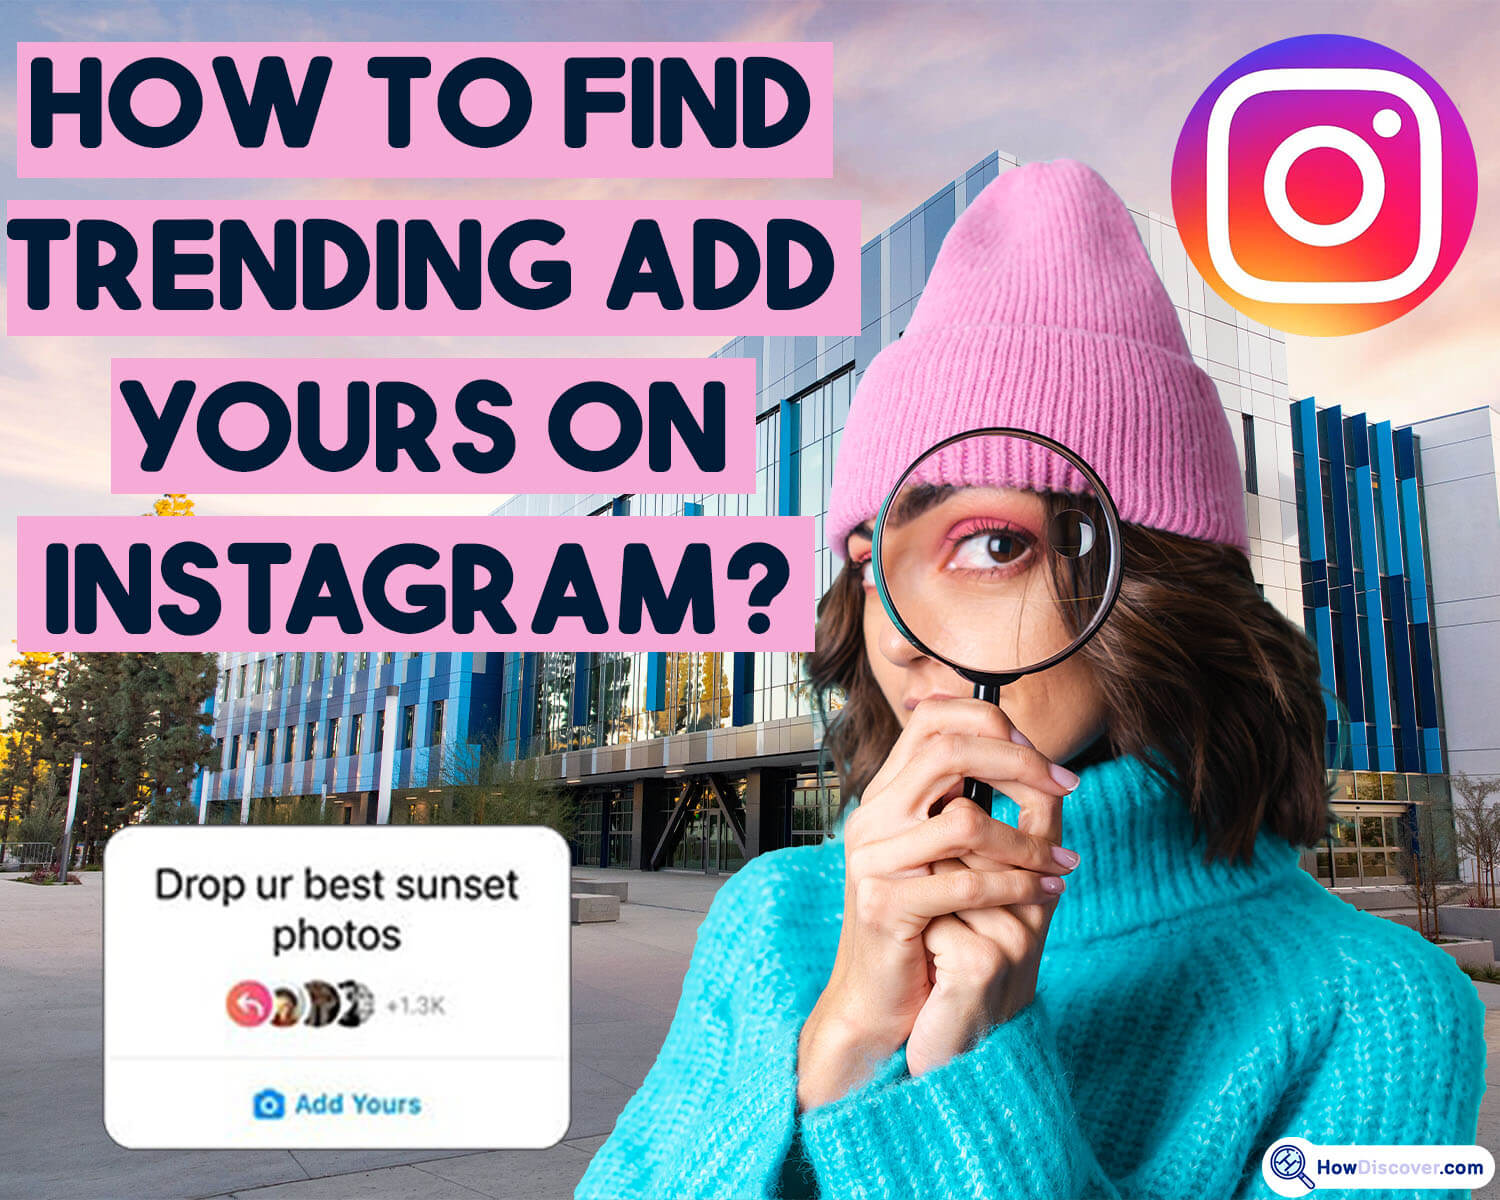 How To Find Trending Add yours on Instagram